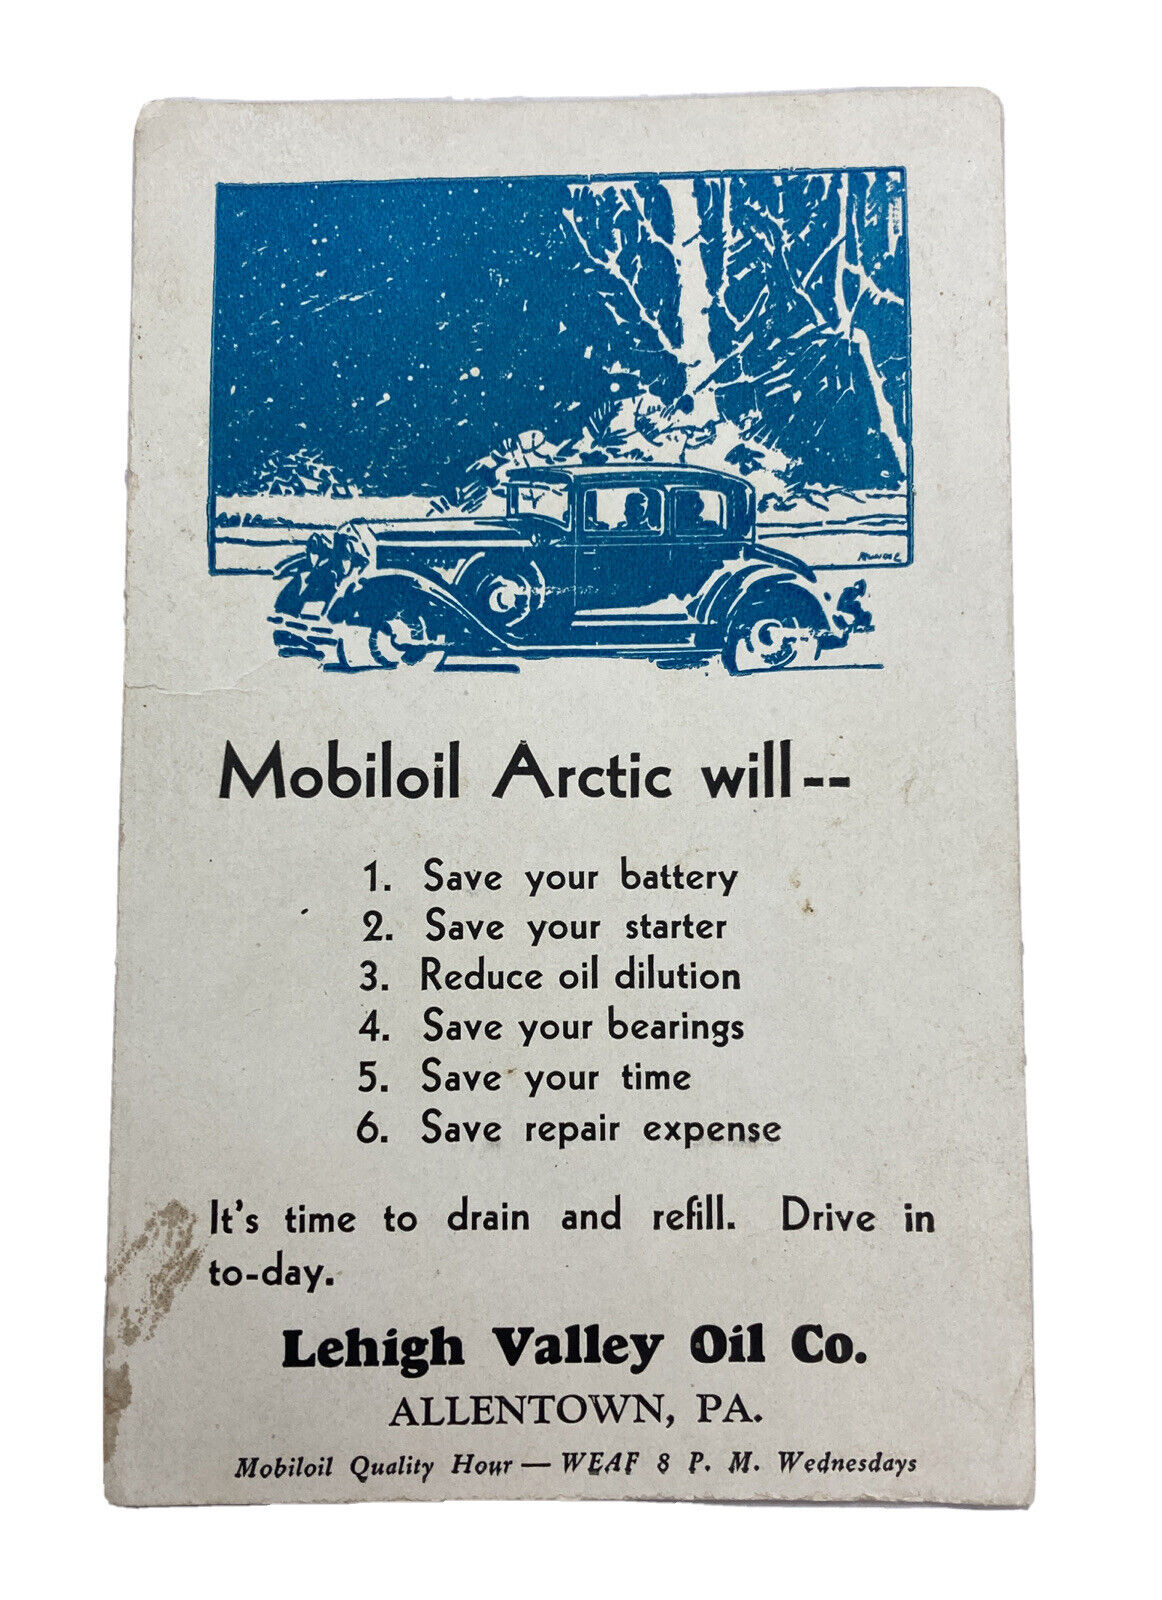 Vintage Advertising Mobiloil Arctic Time To Drain And Refill/ Lehigh Valley Oil